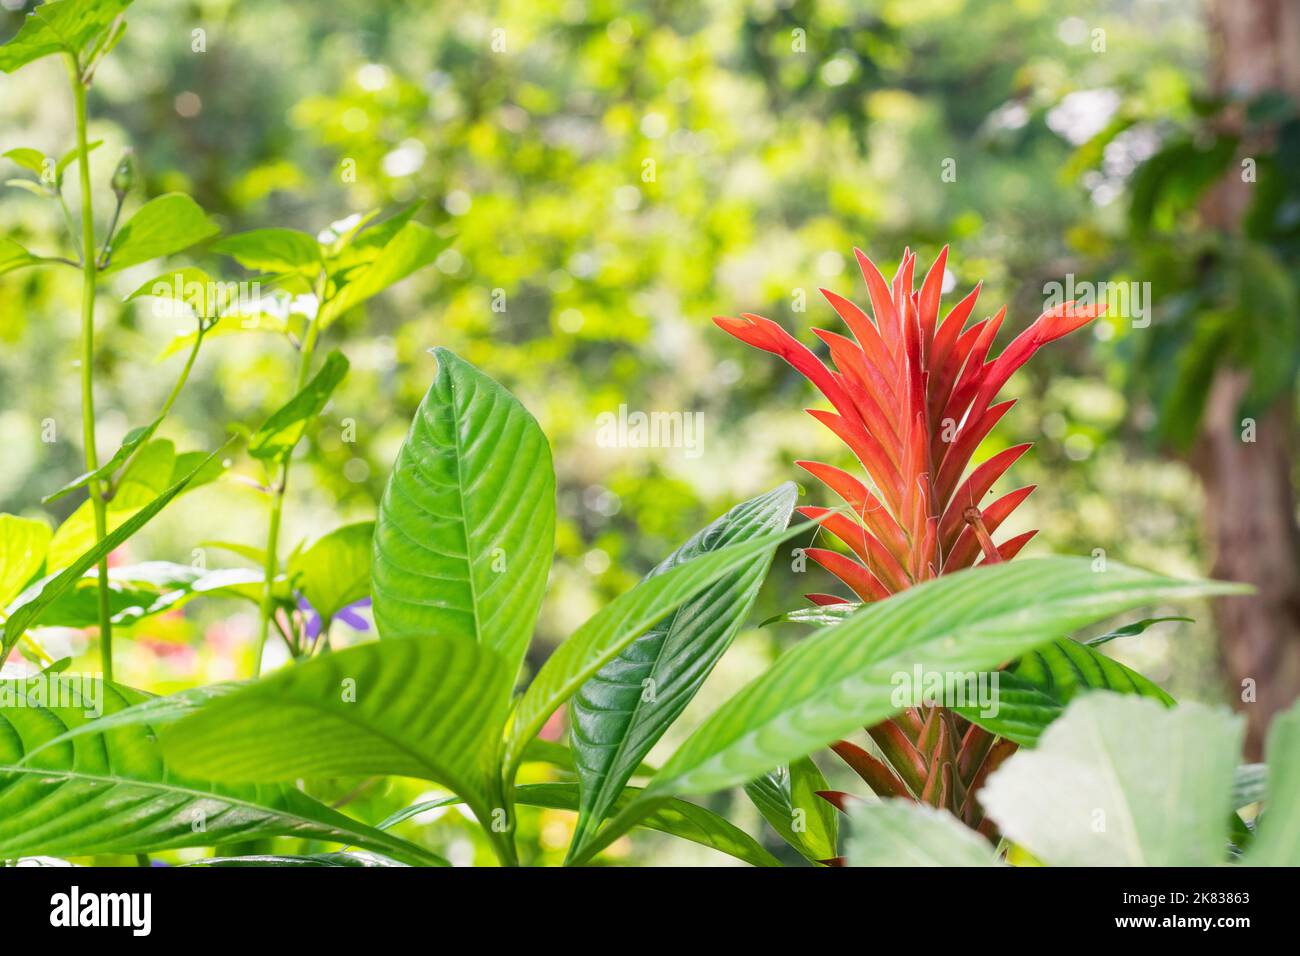 red flower in the shape of a spike or flame, cultivated in a country garden, belonging to the Guzmania species, surrounded by large green leaves. deco Stock Photo